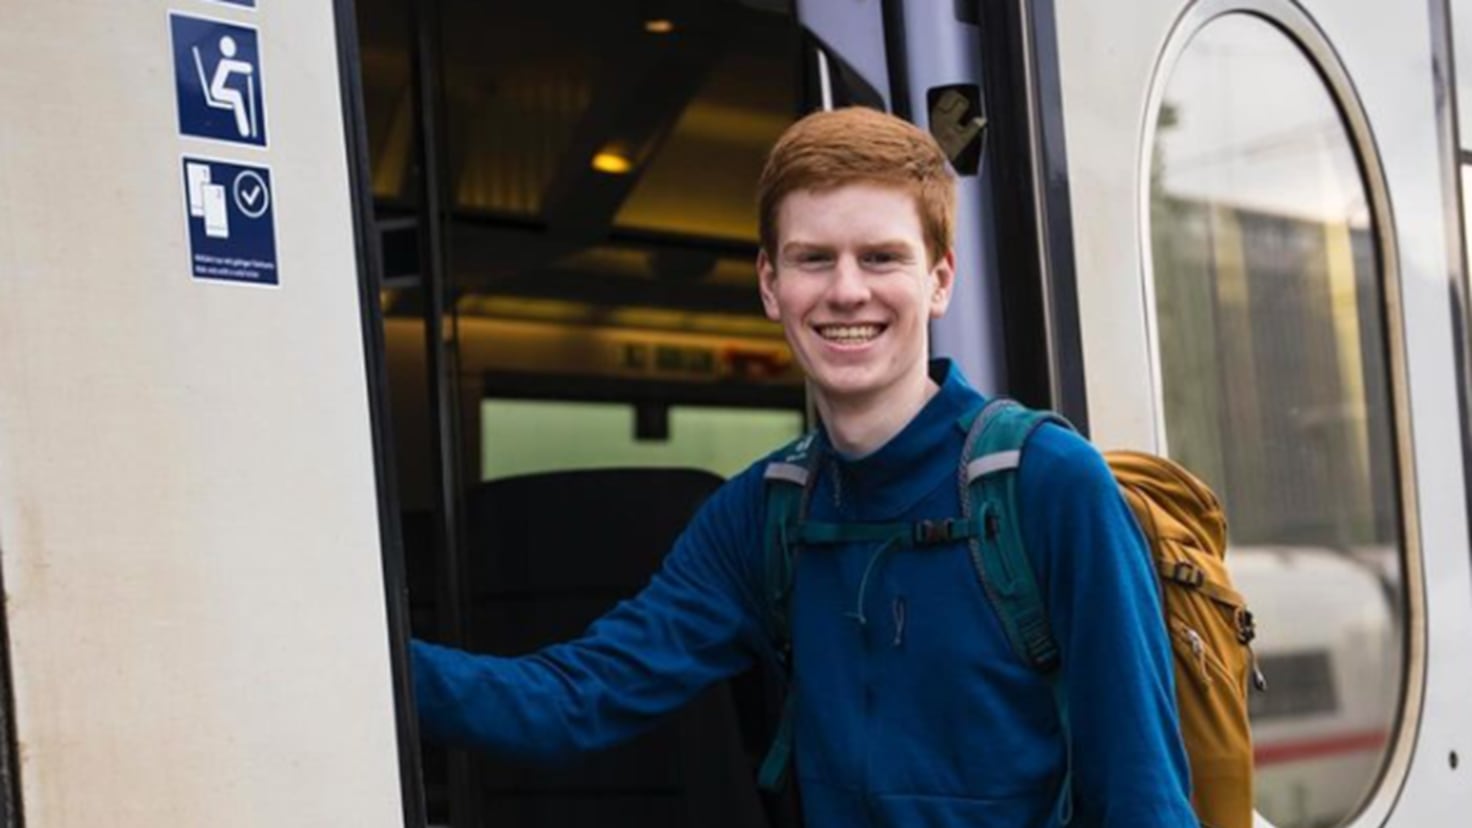 A 17-year-old boy has been living on a train for two years
